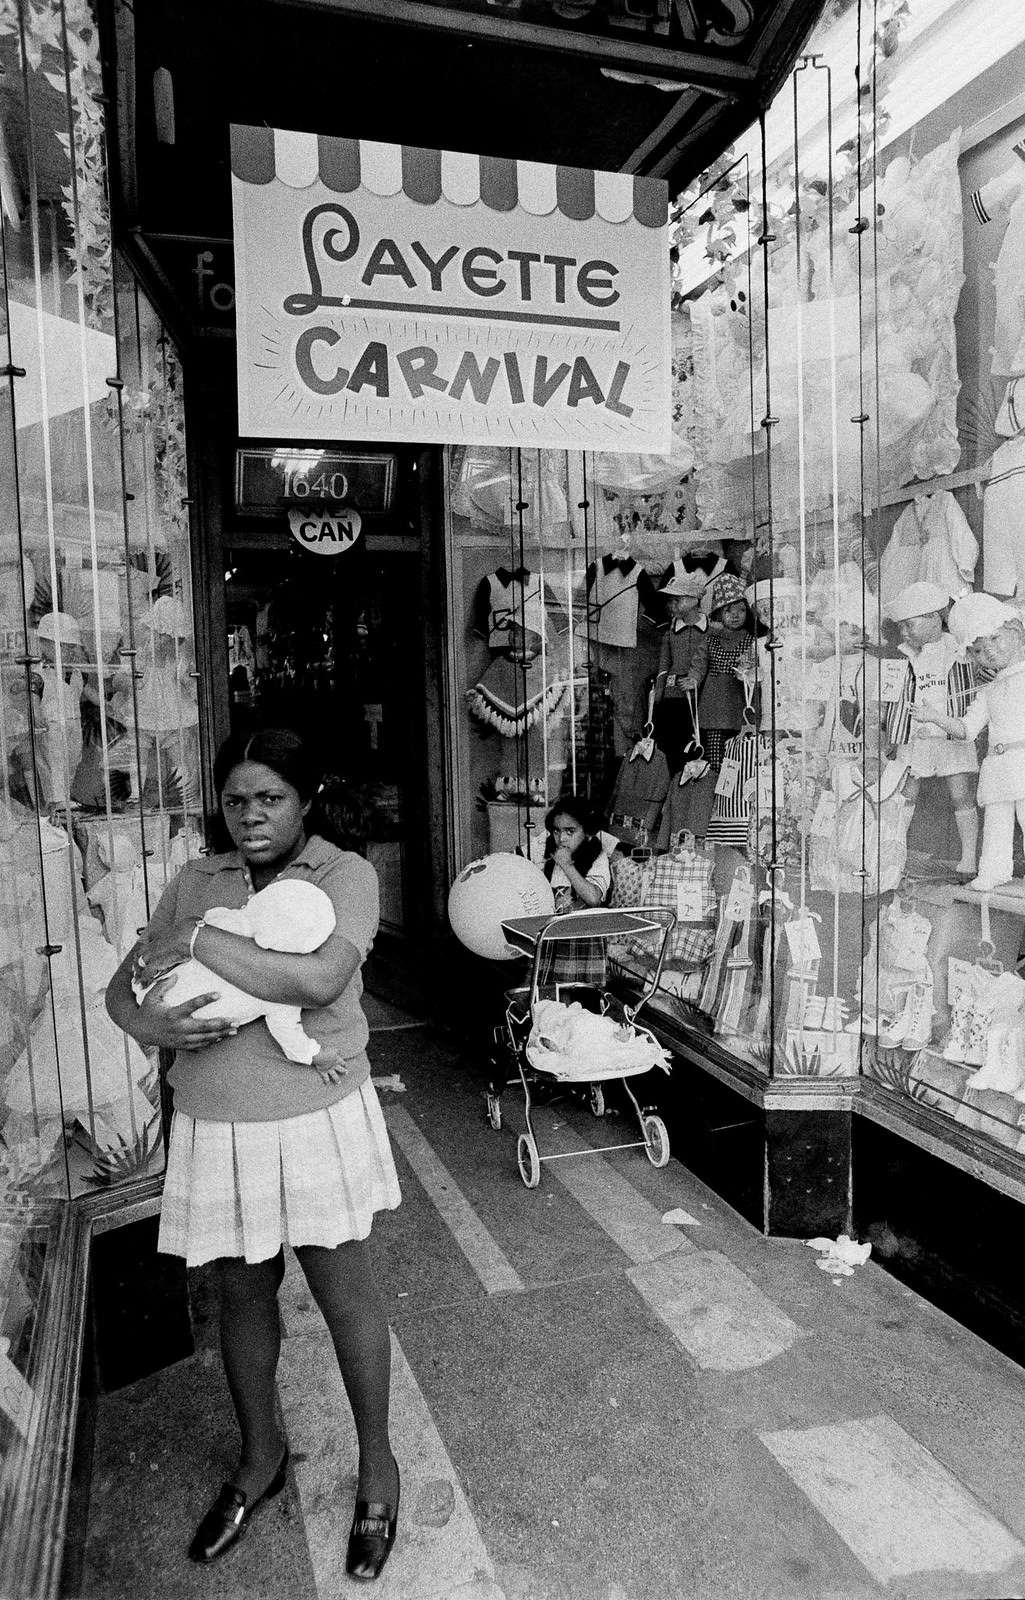 Fascinating Photos of Brownsville, Brooklyn in the 1970s that Show Street Scenes and Life